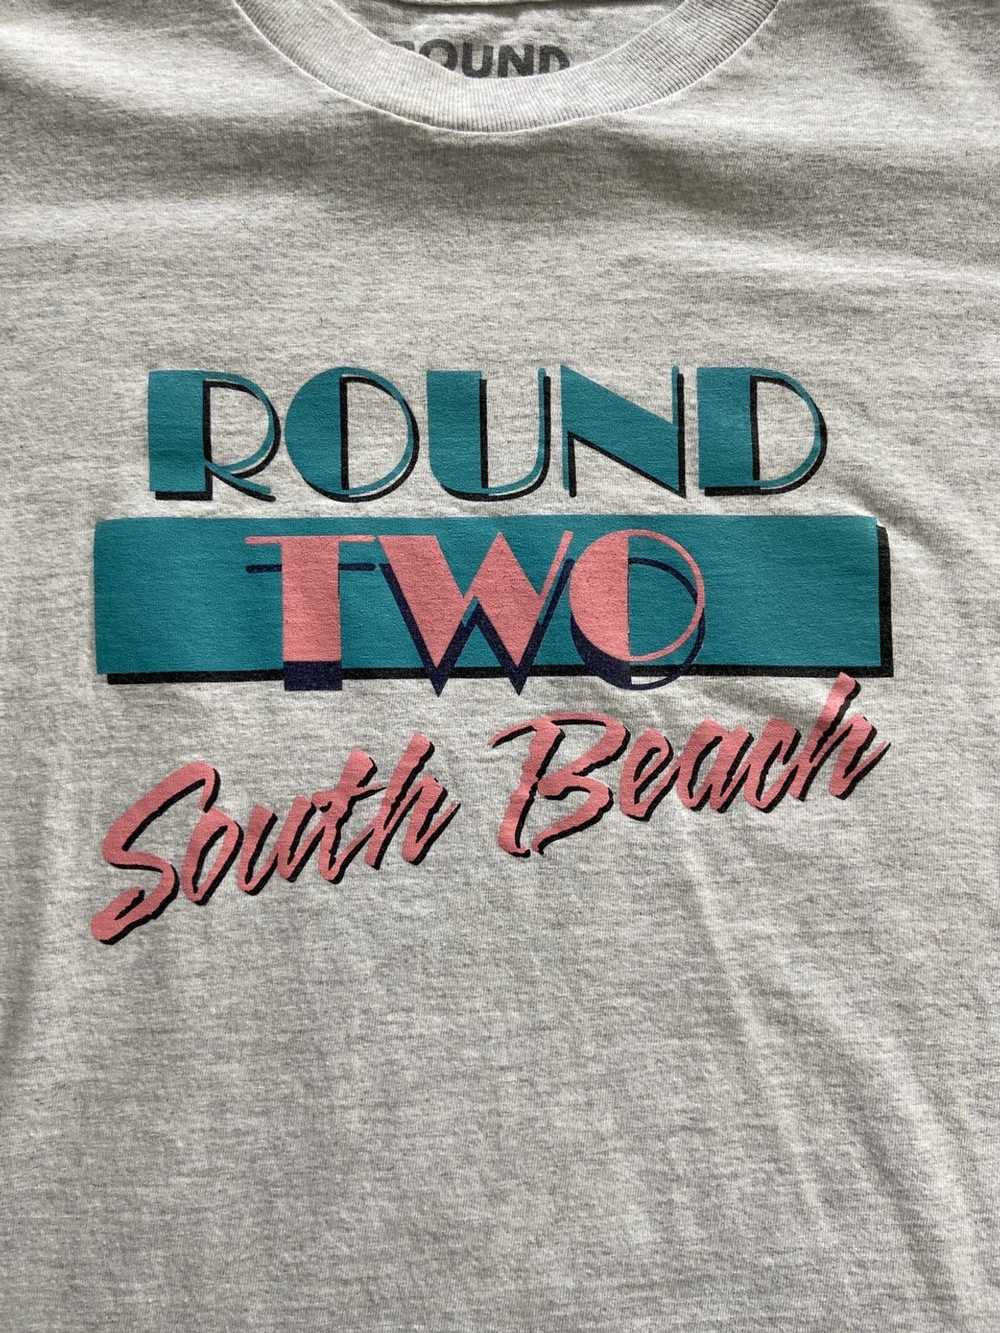 Round Two Round Two South Beach Shirt - image 2